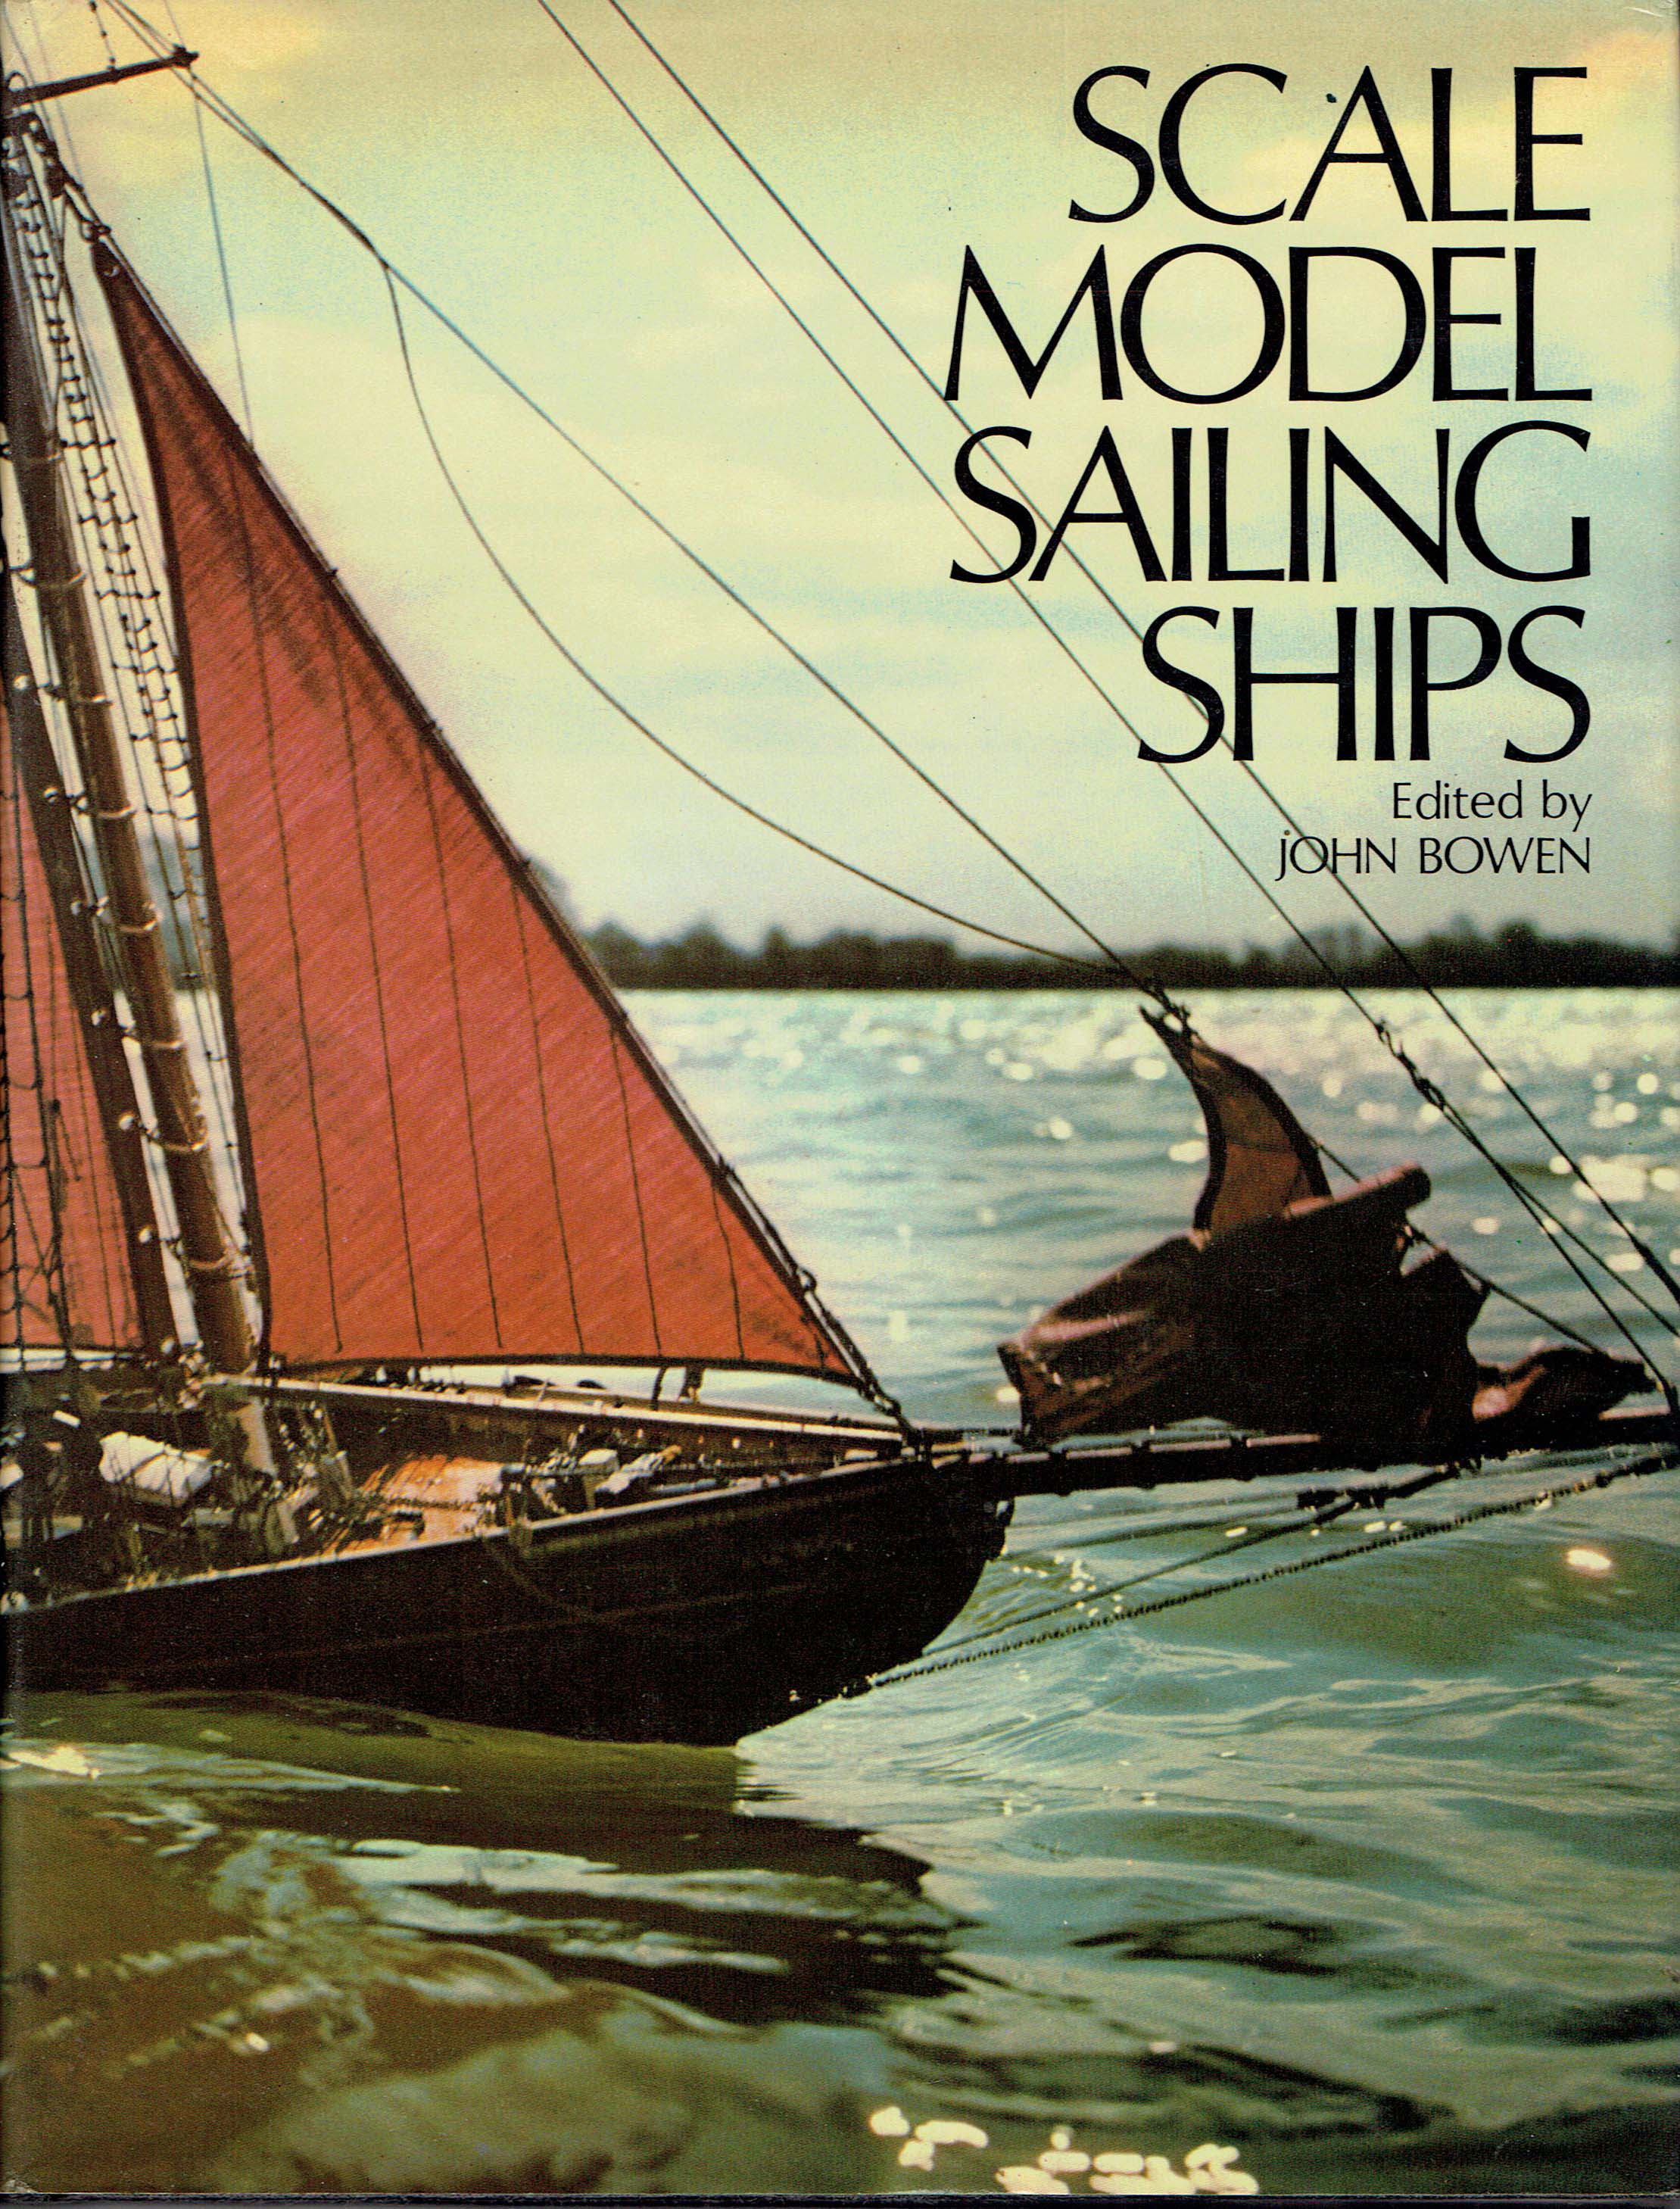 Scale model sailing ships